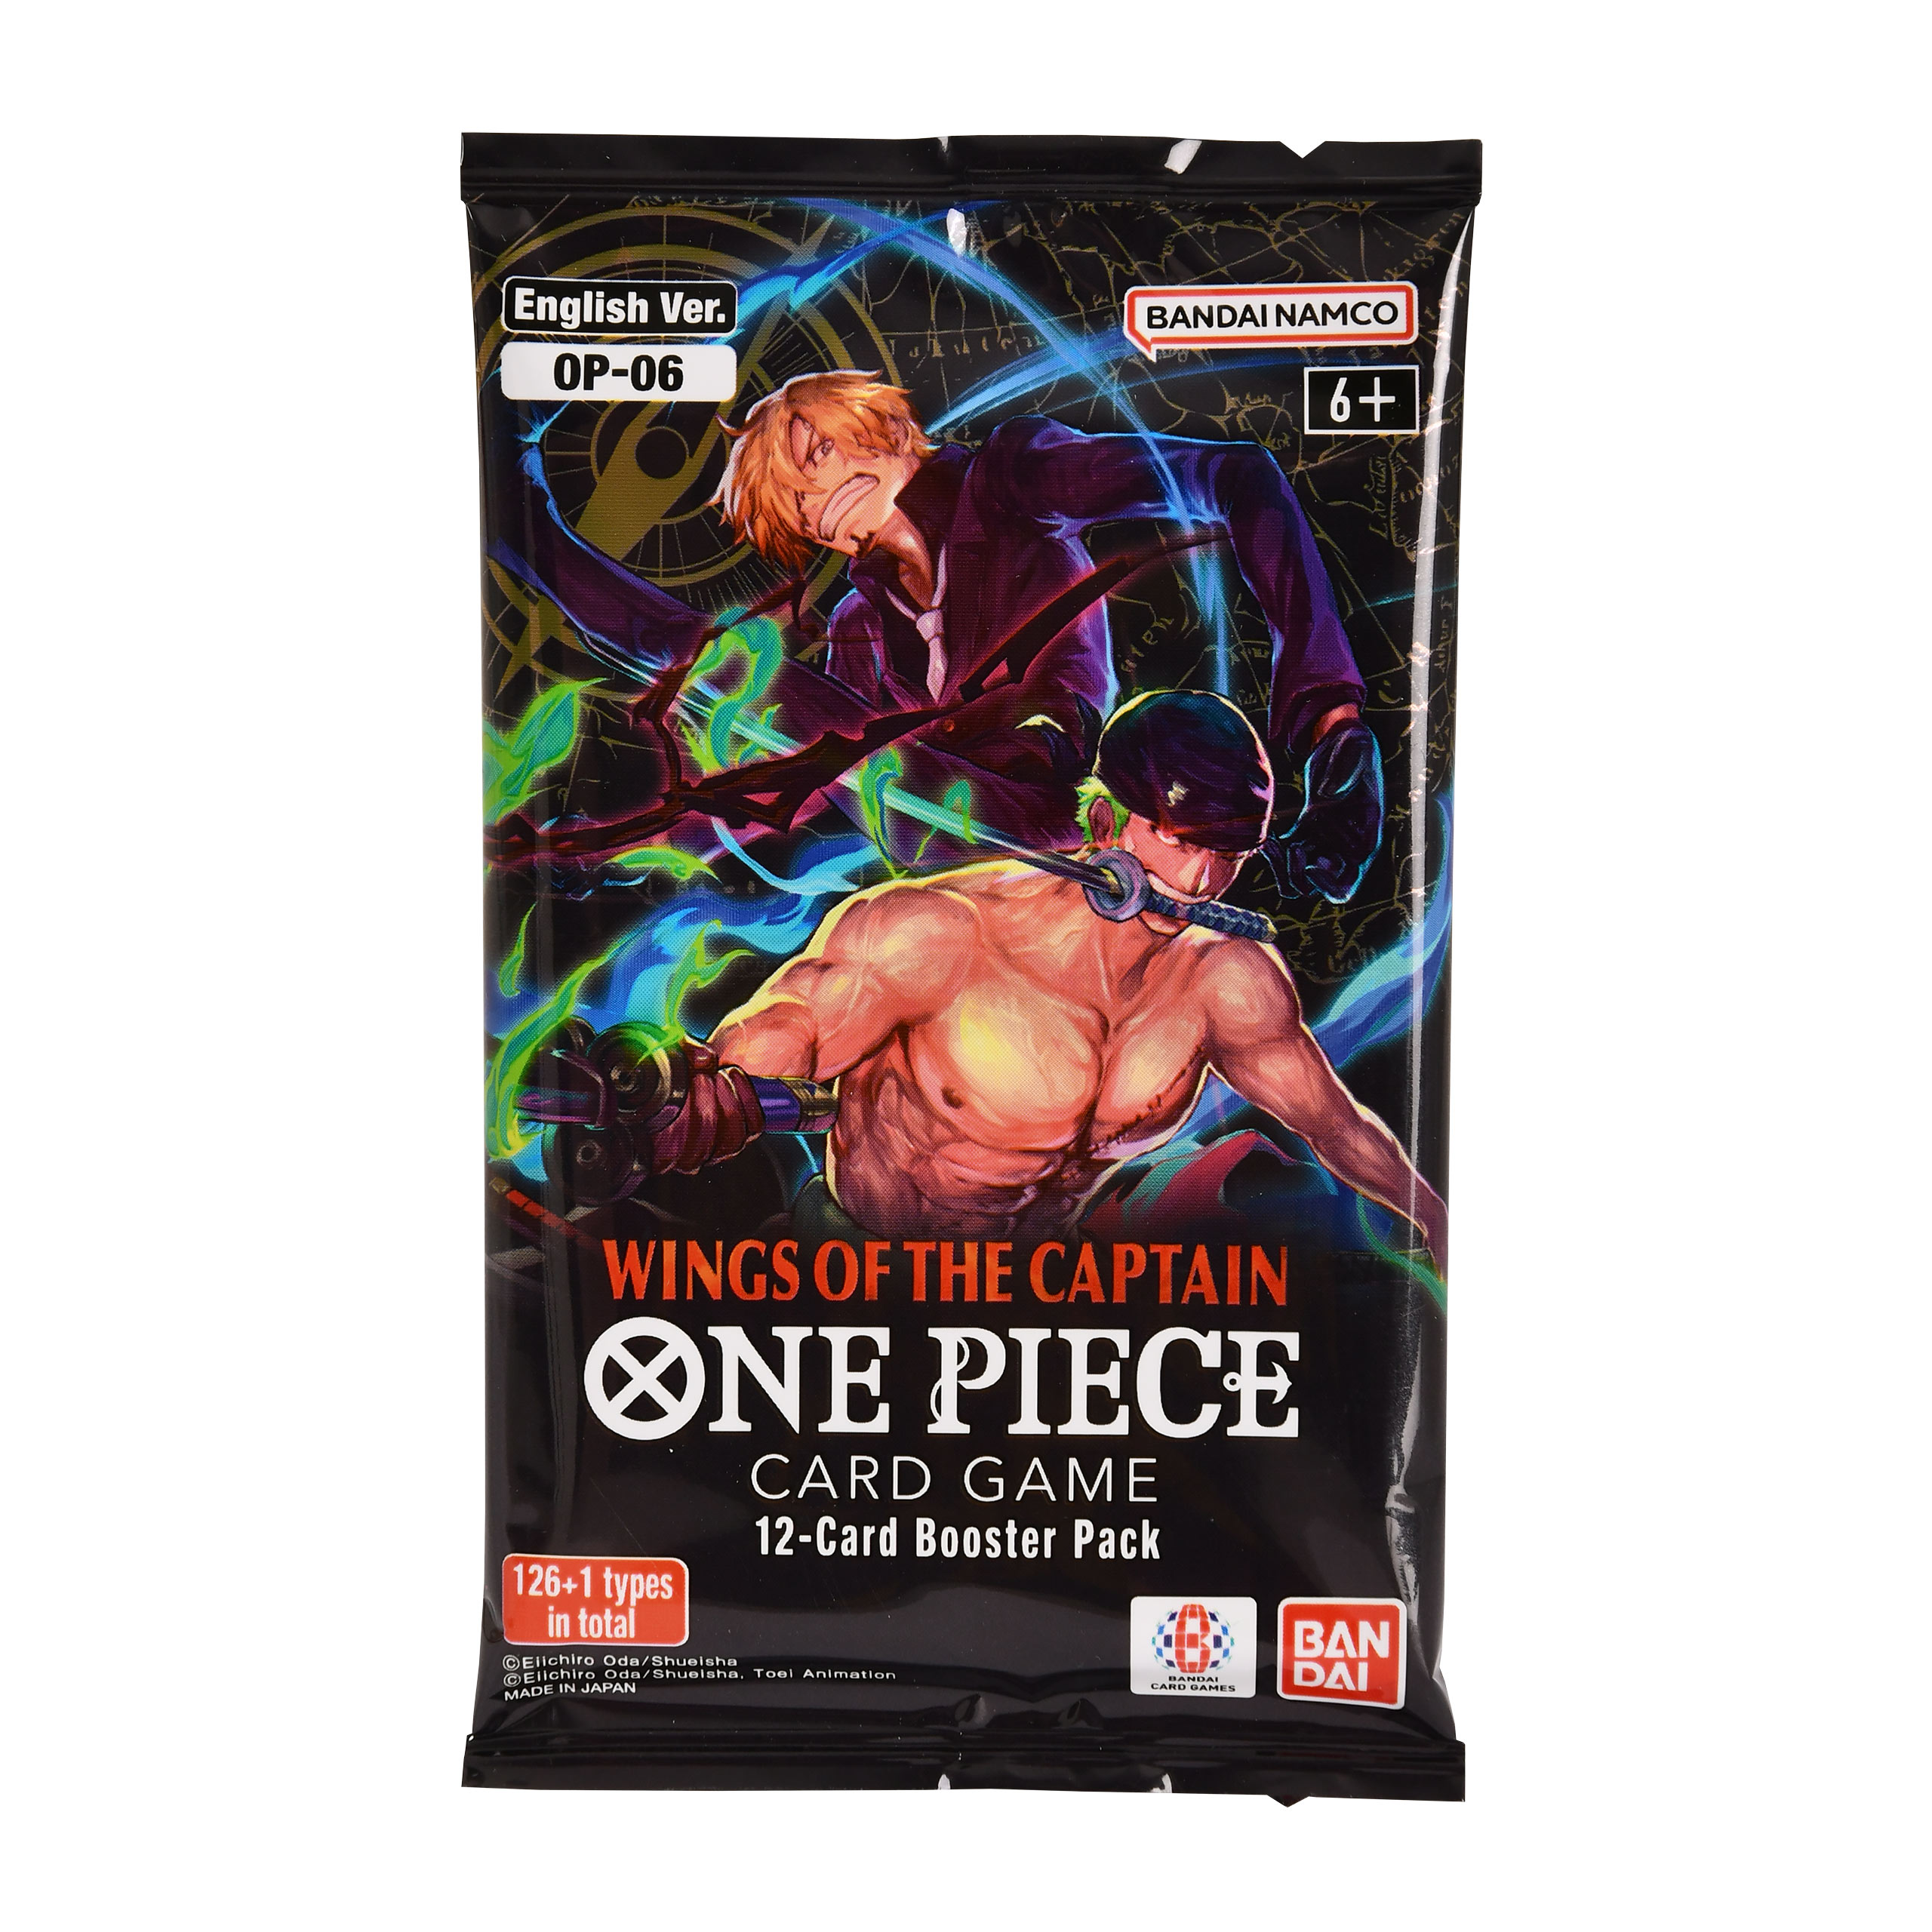 One Piece Card Game - Les ailes du capitaine cartes à collectionner Booster